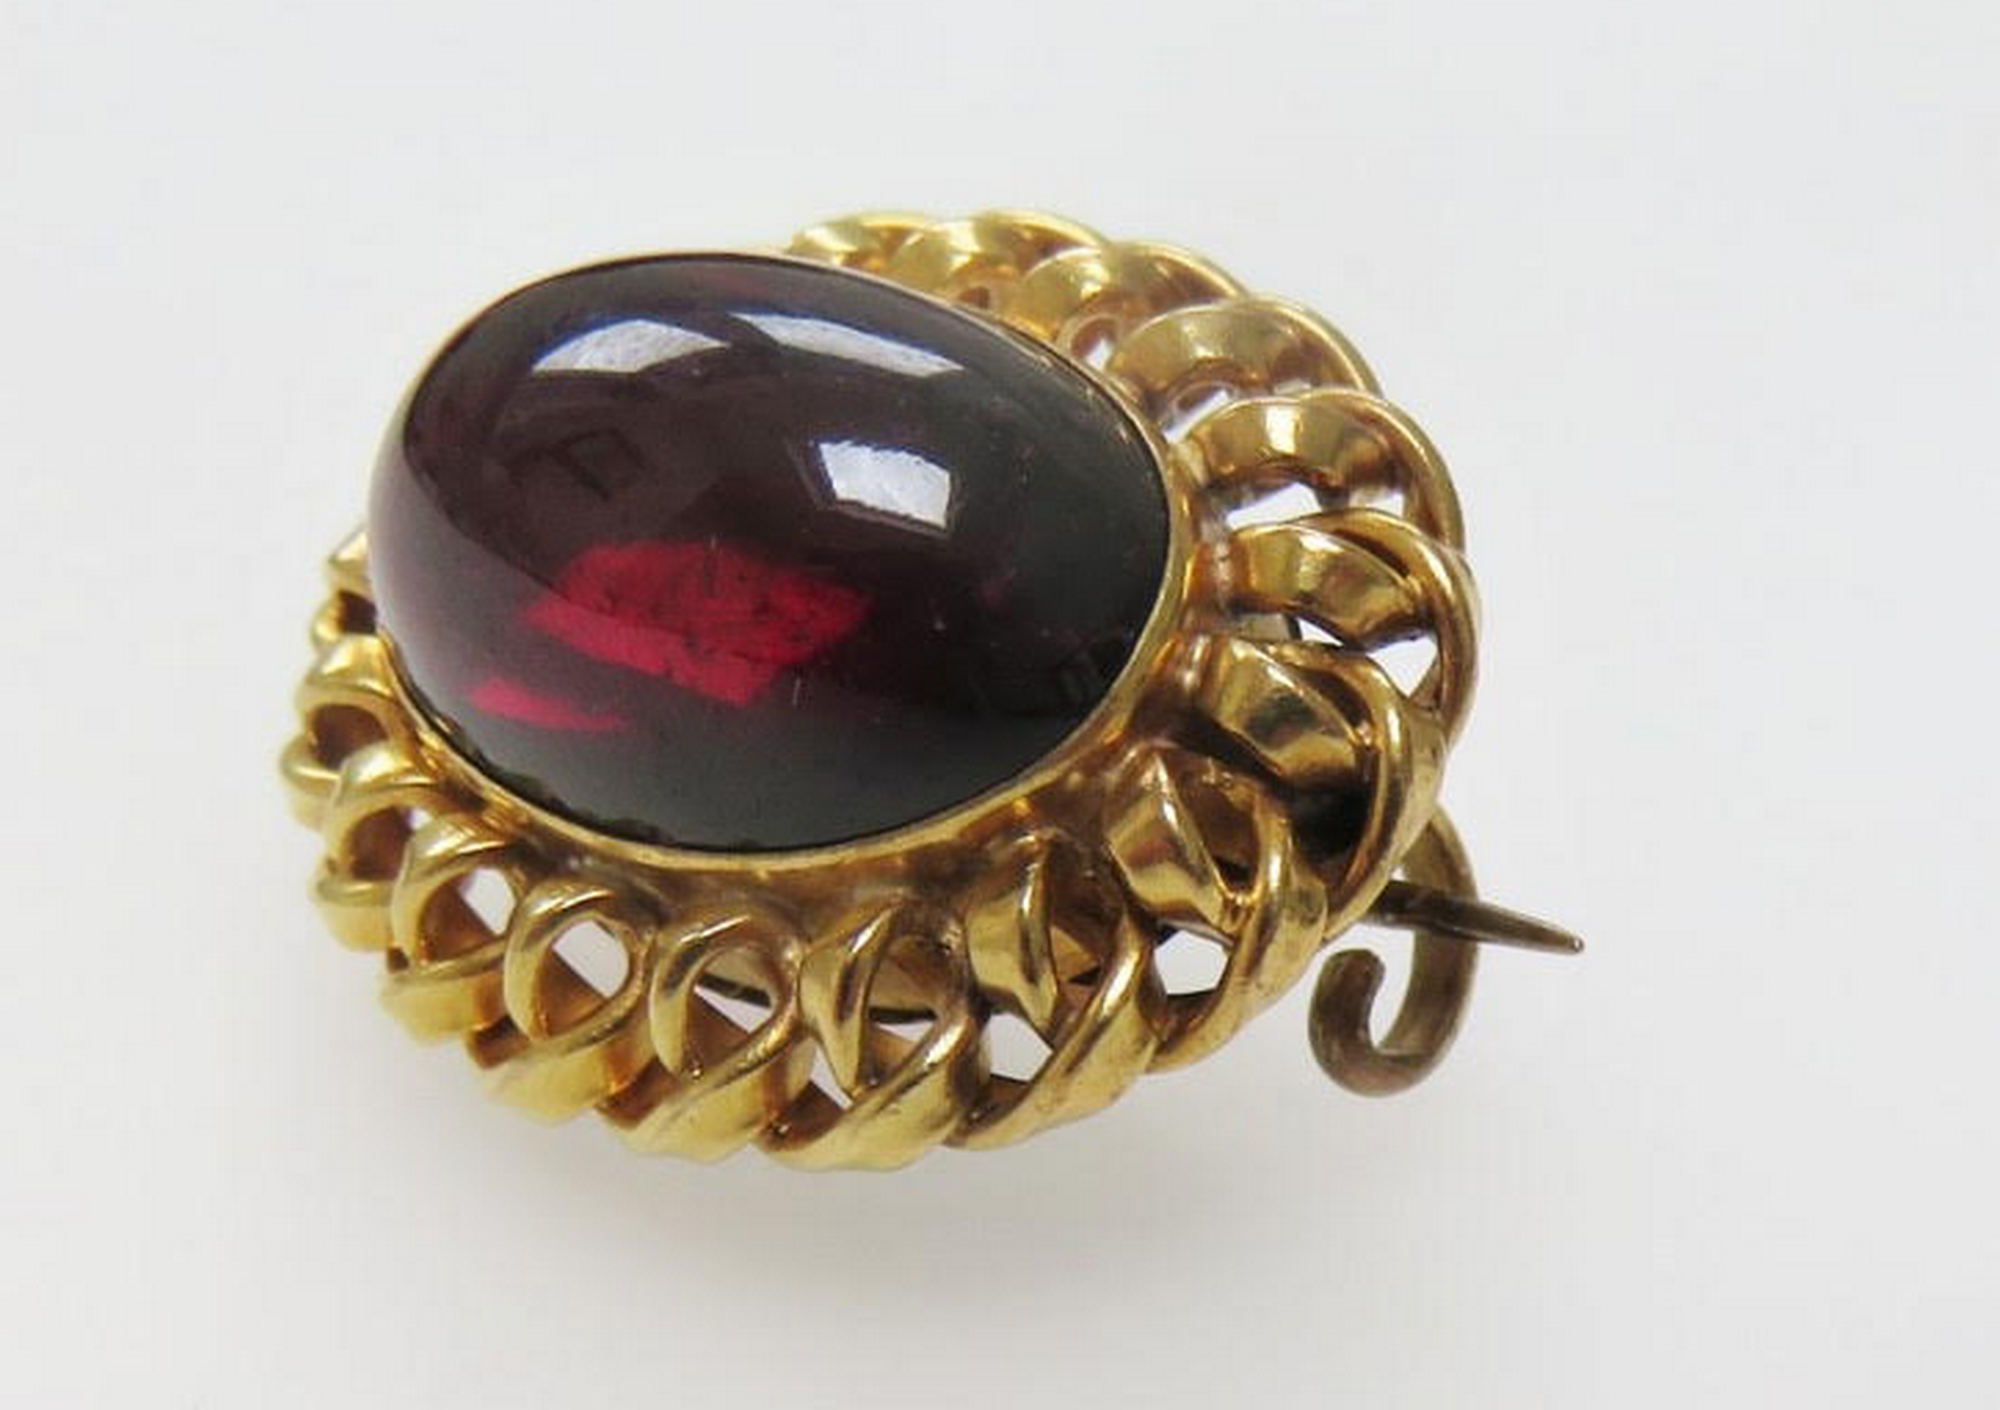 Victorian yellow metal and garnet brooch (tests as 18ct)-secret compartment at back of brooch. - Image 4 of 5